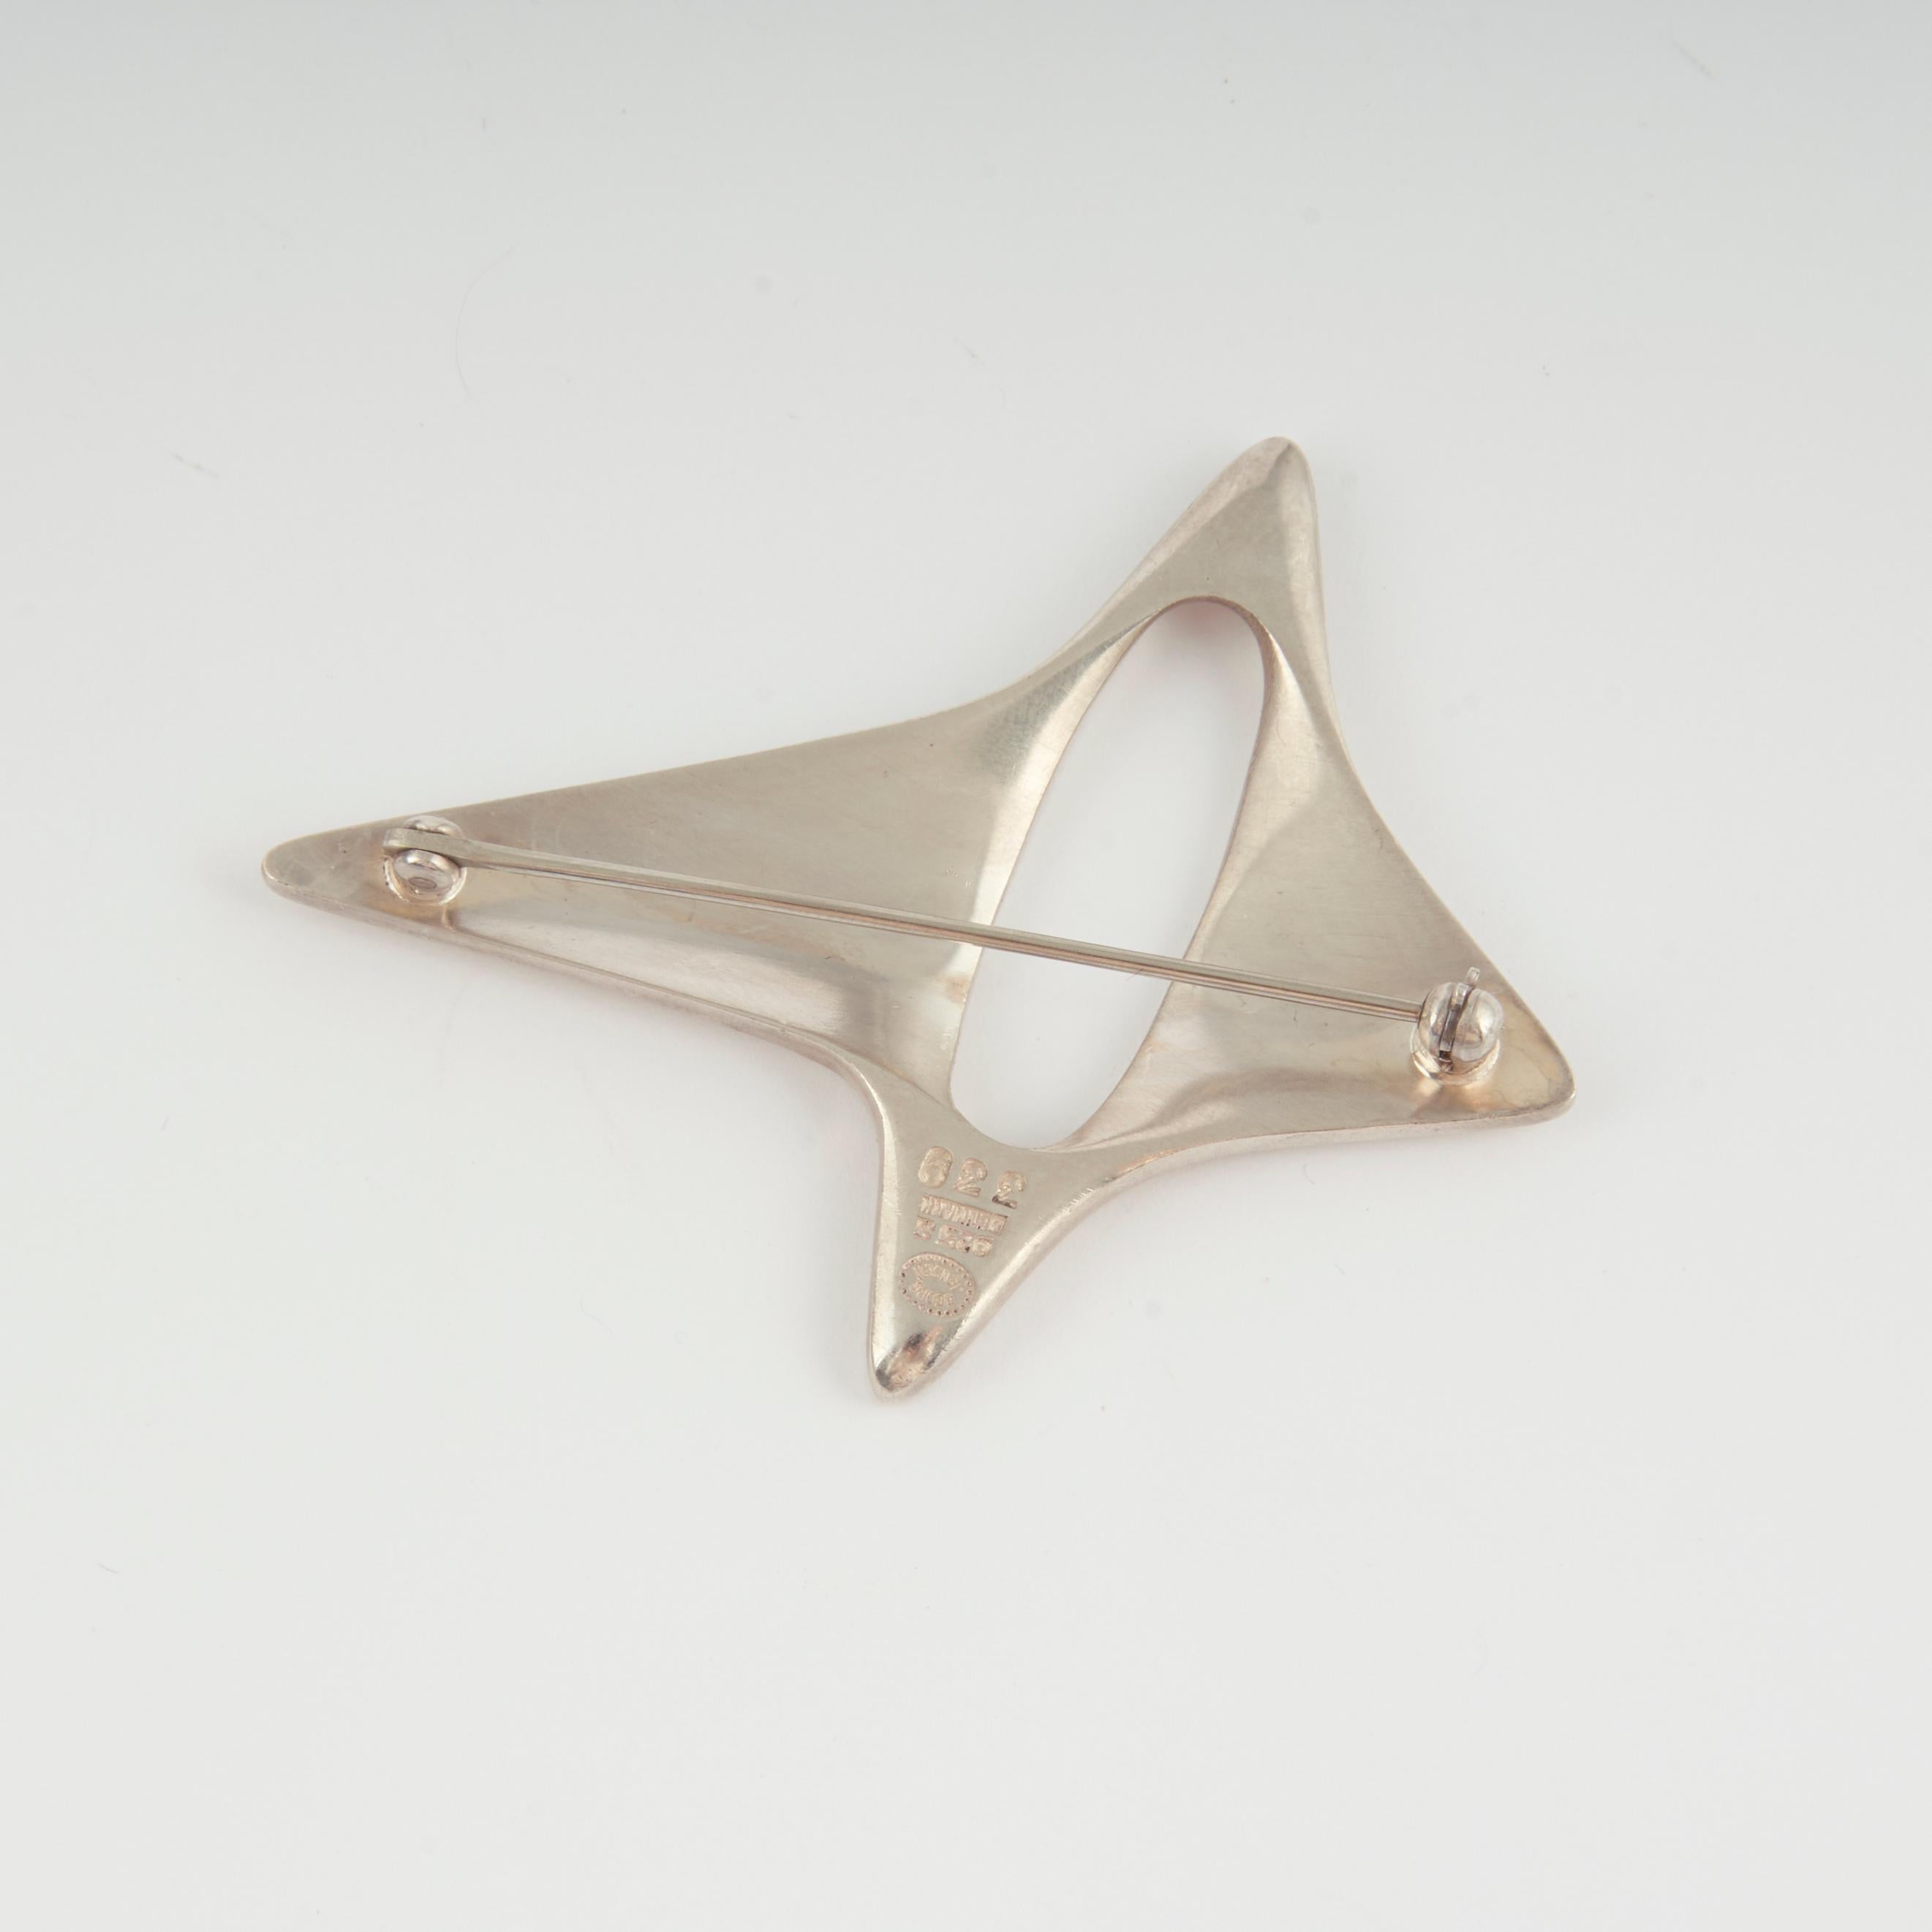 Georg Jensen Sterling Amorphic Brooch, Design #339 by Henning Koppel

Designed in 1948.

A similar example can be seen in the book, GEORG JENSEN JEWELRY by Isabelle Anscombe, edited by David A. Taylor. Yale University Press, pg. 271

Designer: